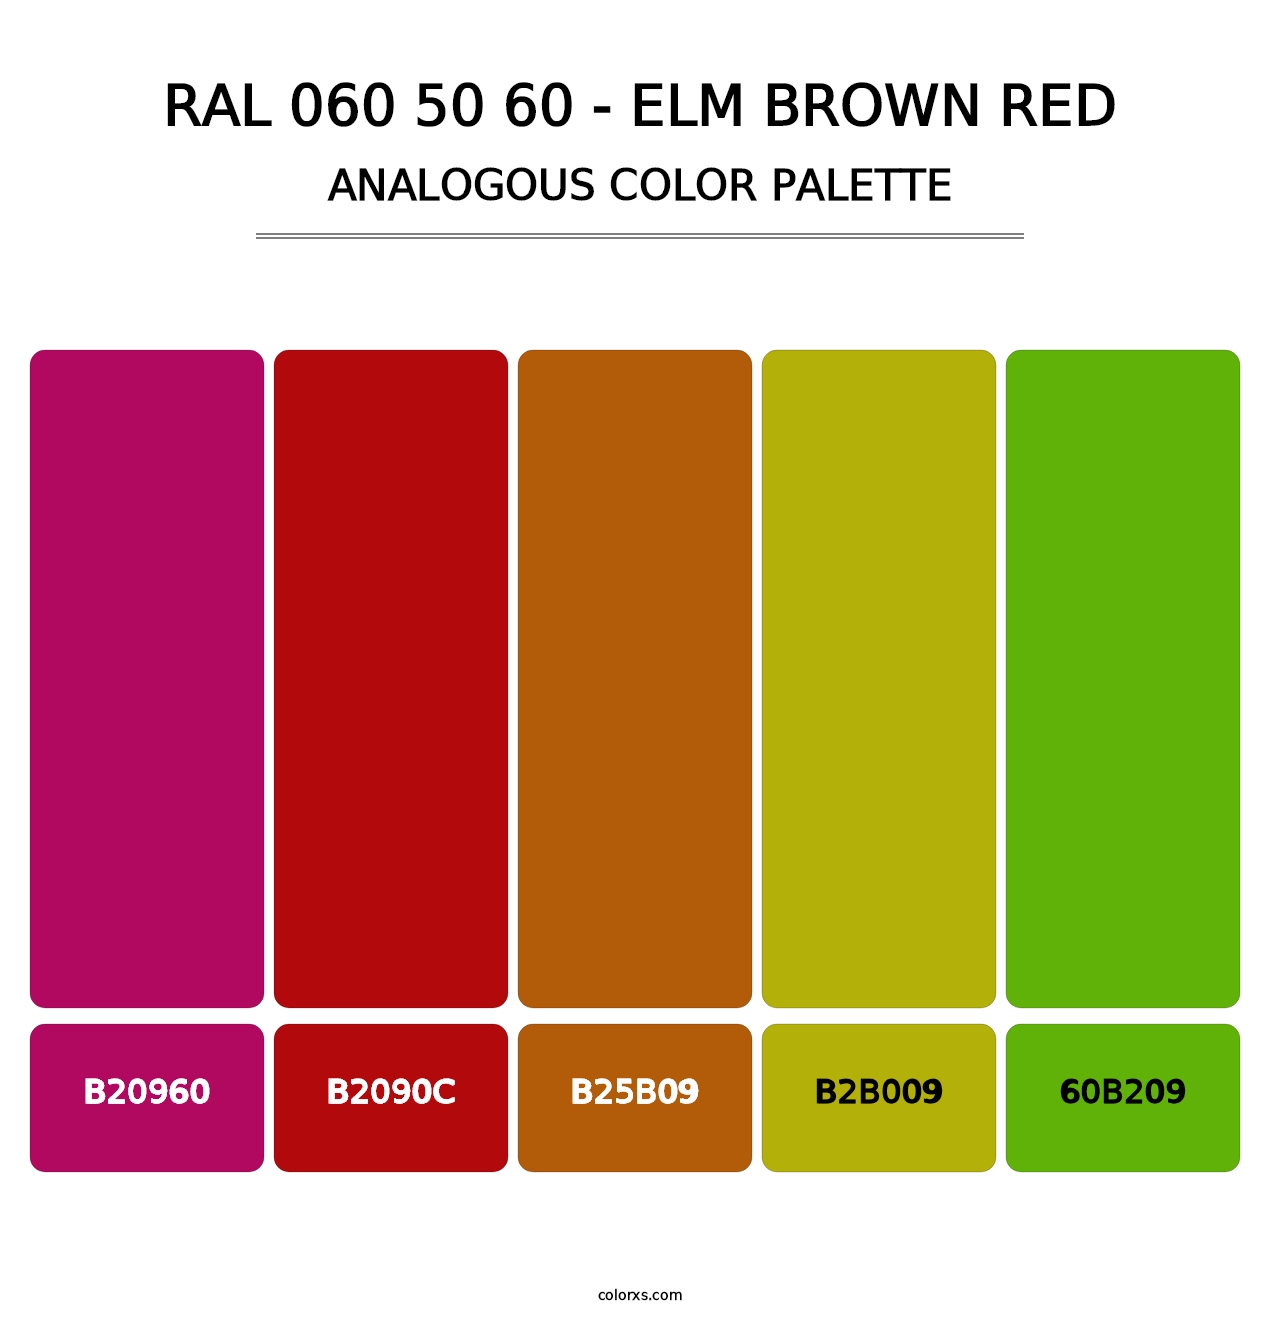 RAL 060 50 60 - Elm Brown Red - Analogous Color Palette